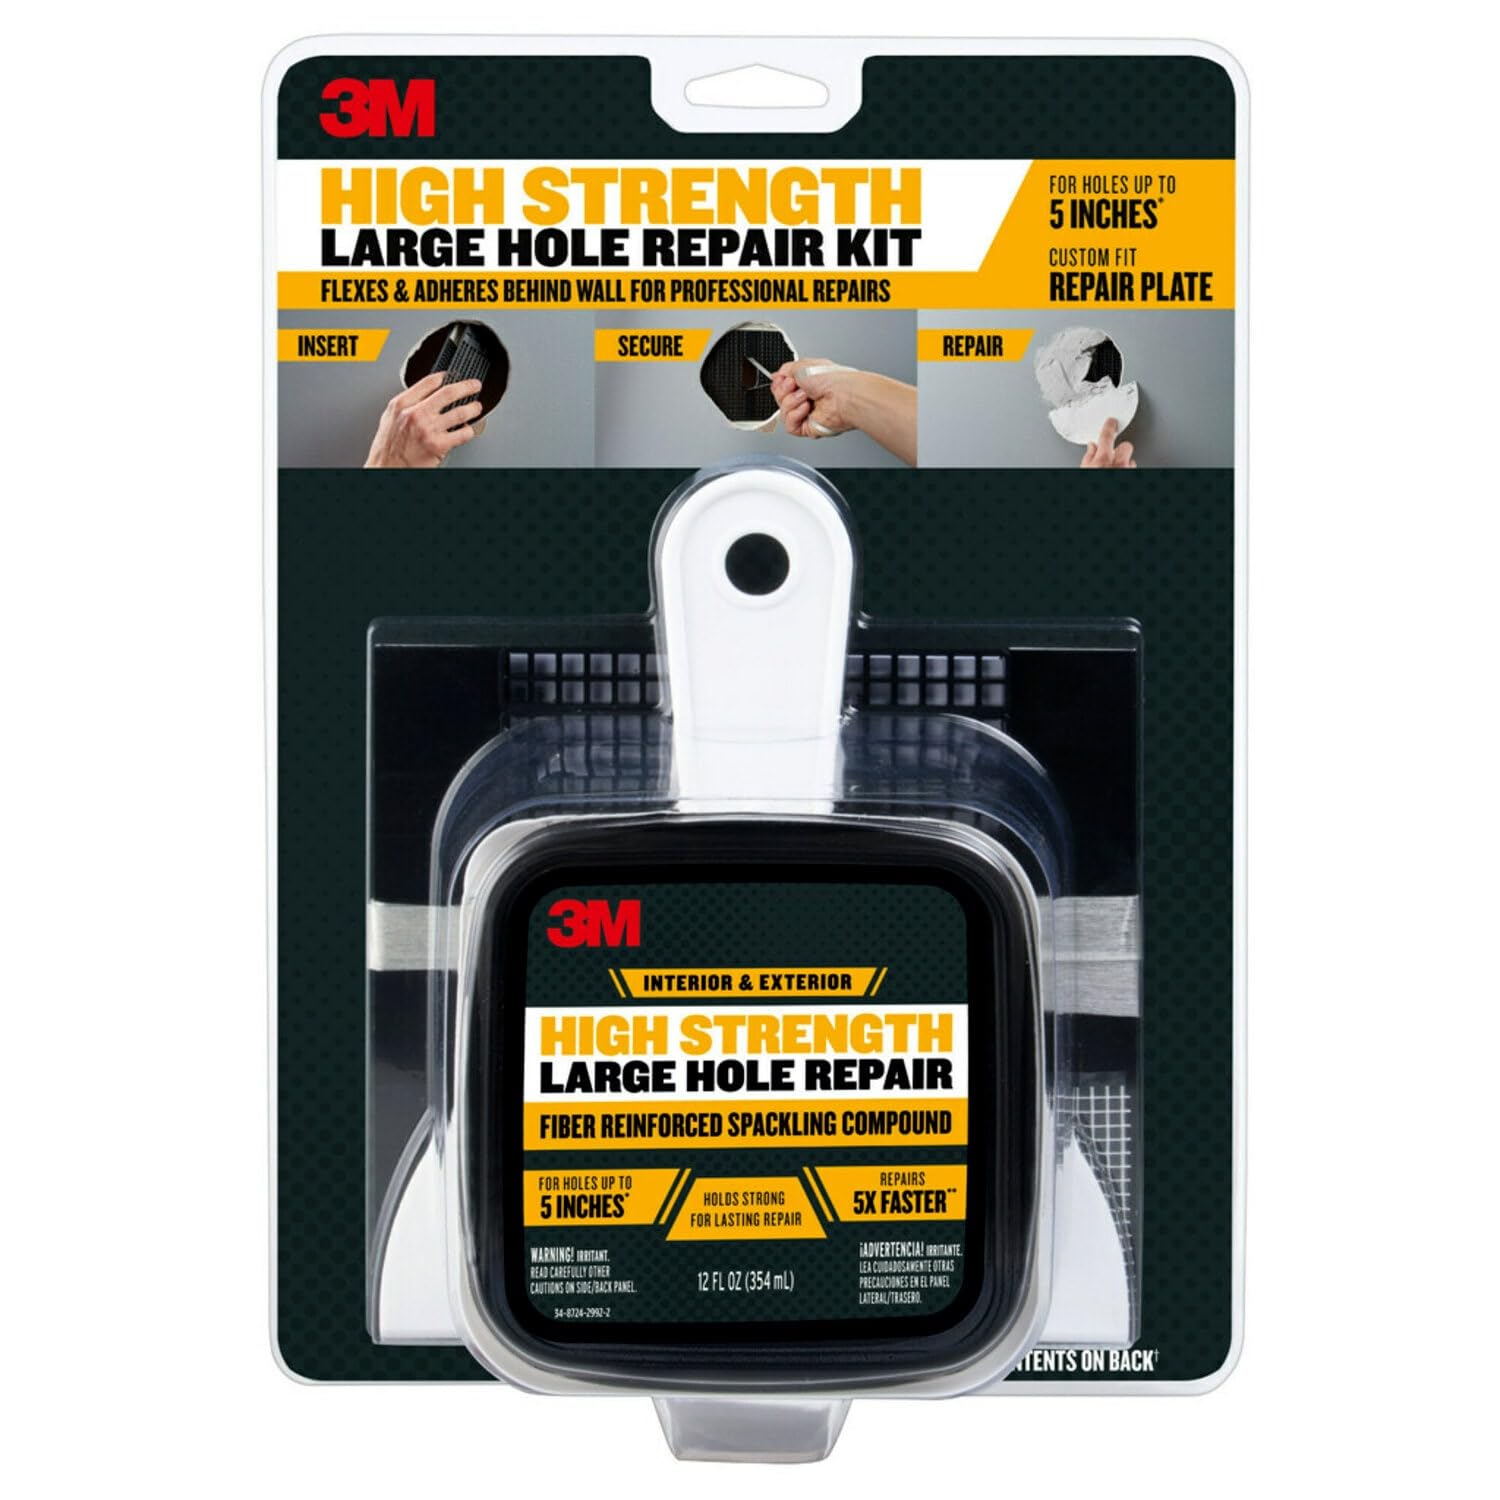 3M High Strength Large Hole Repair Kit $11.78 + Free Shipping w/ Prime or on $35+